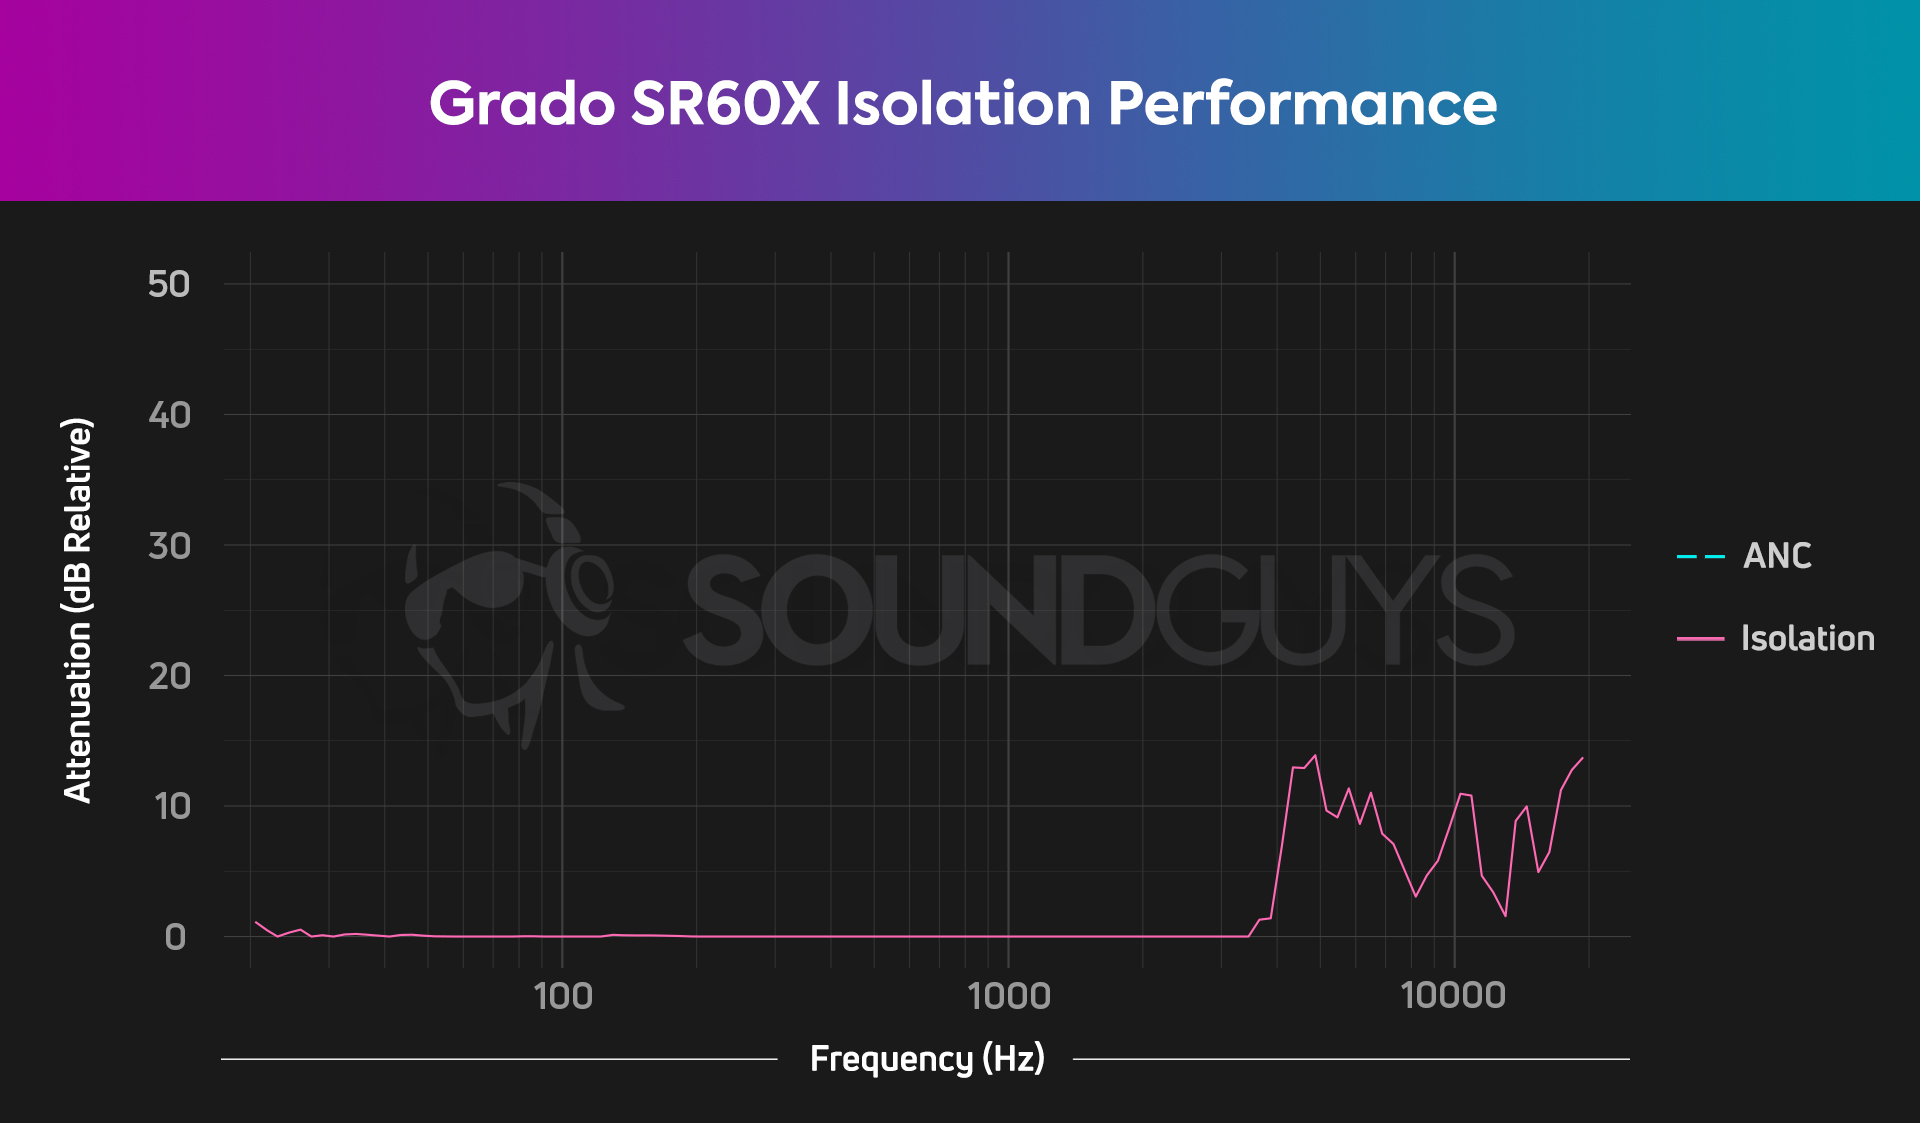 Even without accounting for the boost we found, the Grado SR60X does not attempt to block outside noise.